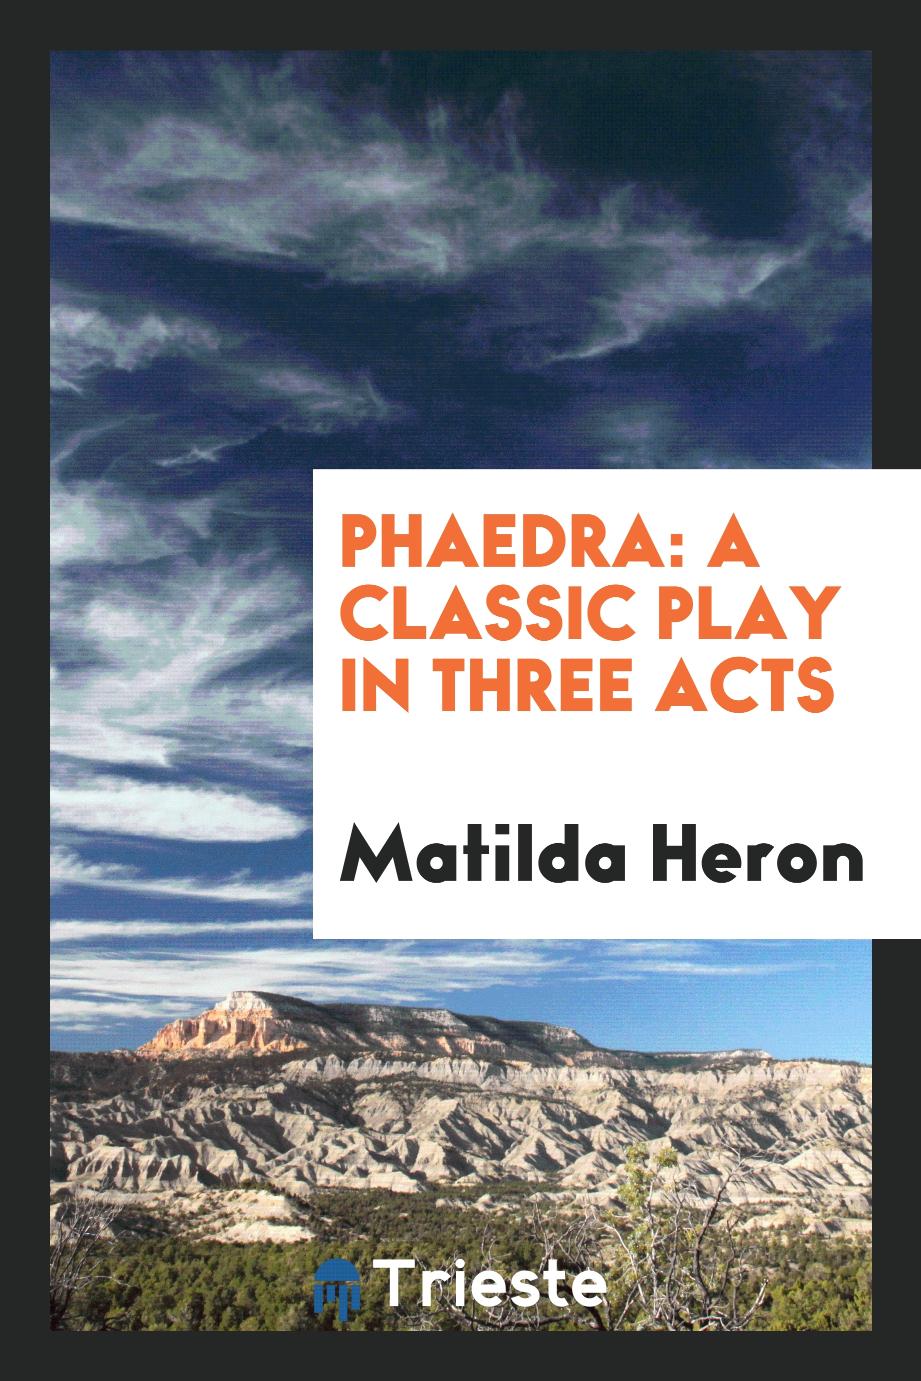 Phaedra: A Classic Play in Three Acts